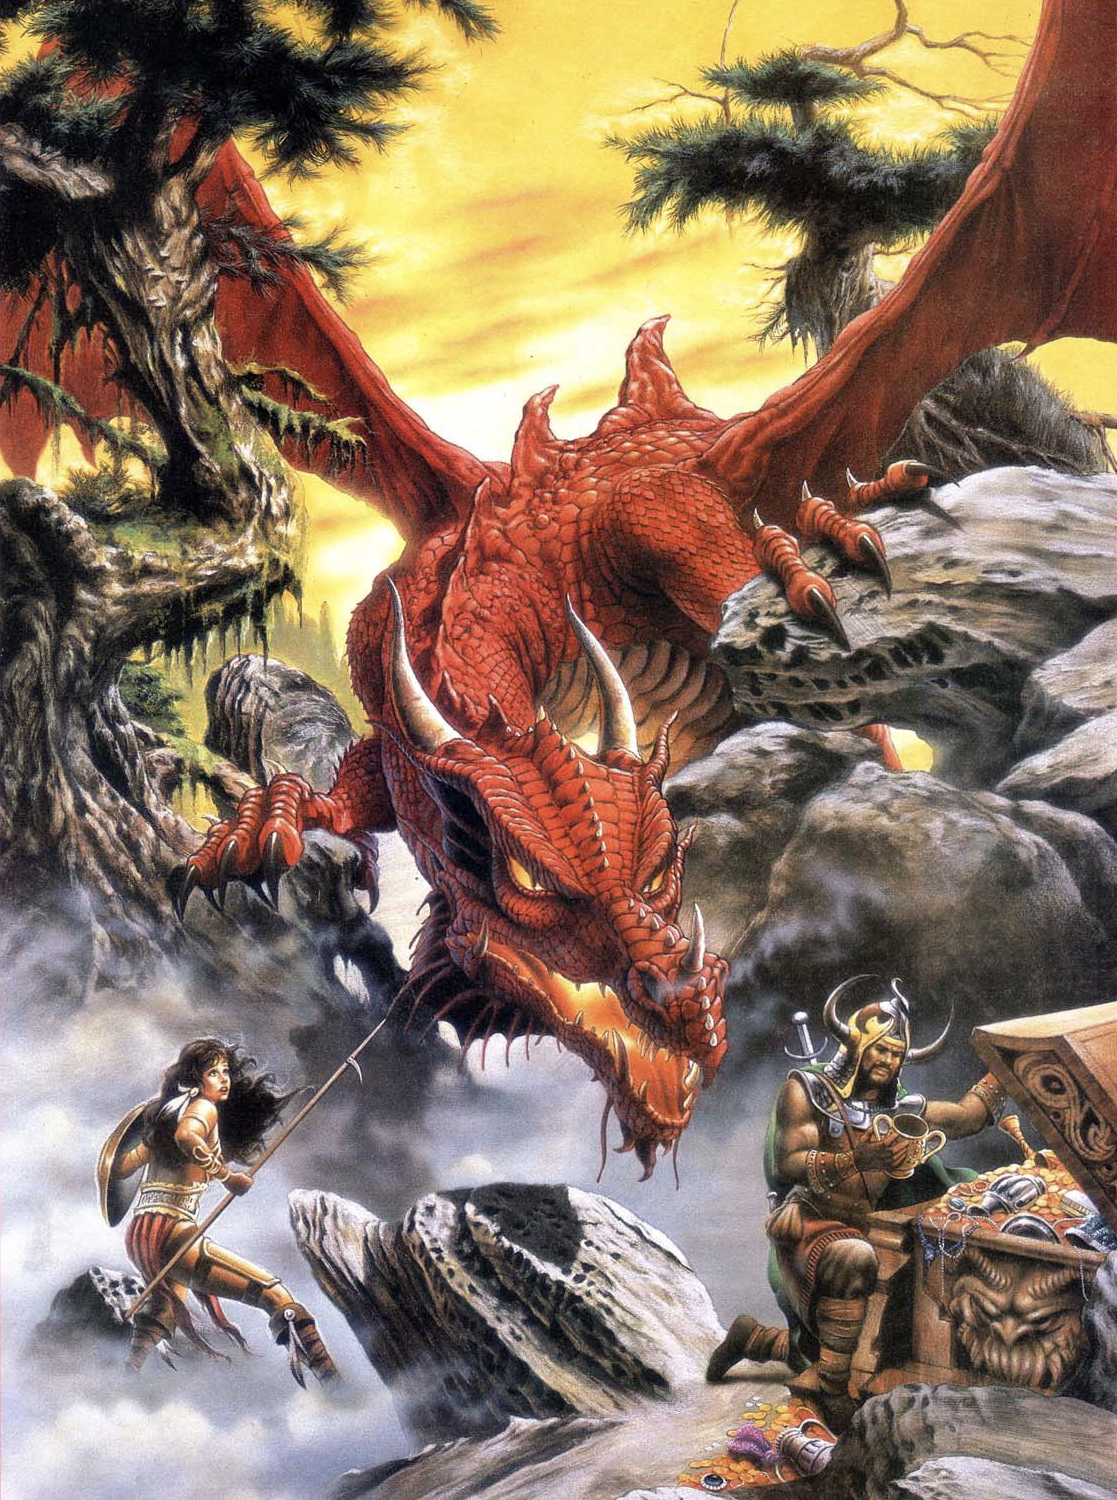 20 Strongest Types Of Dragons in Dungeons & Dragons